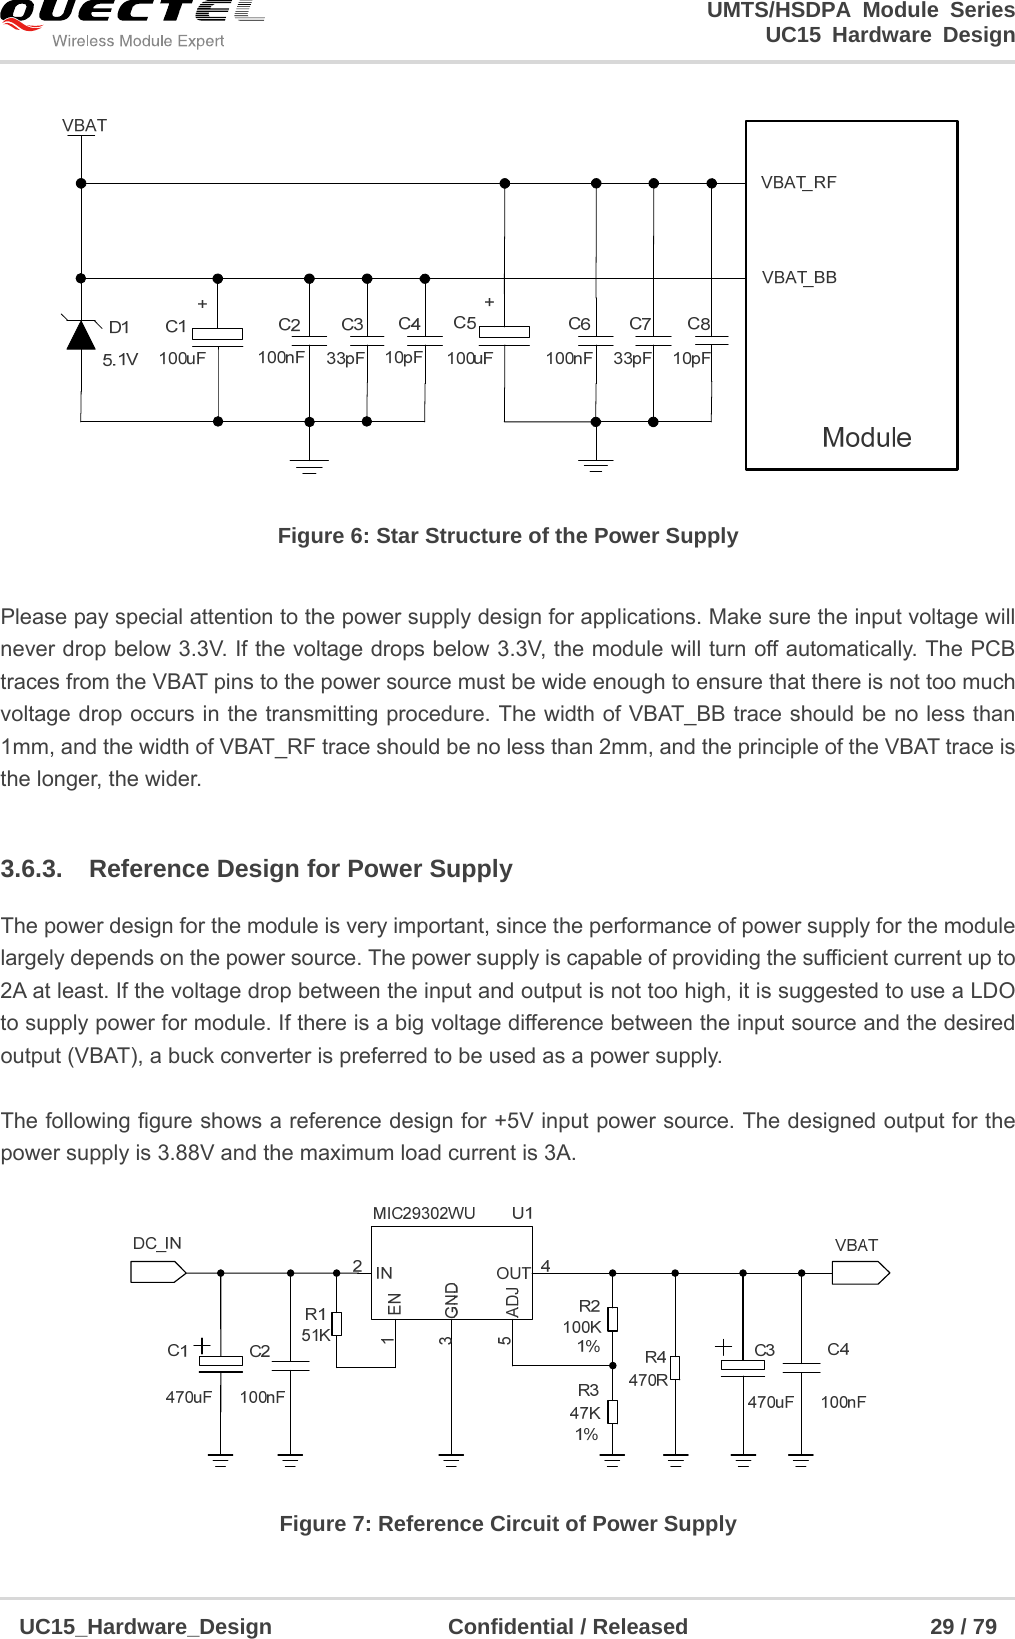                                                                        UMTS/HSDPA Module Series                                                                 UC15 Hardware Design  UC15_Hardware_Design                Confidential / Released                      29 / 79     Figure 6: Star Structure of the Power Supply  Please pay special attention to the power supply design for applications. Make sure the input voltage will never drop below 3.3V. If the voltage drops below 3.3V, the module will turn off automatically. The PCB traces from the VBAT pins to the power source must be wide enough to ensure that there is not too much voltage drop occurs in the transmitting procedure. The width of VBAT_BB trace should be no less than 1mm, and the width of VBAT_RF trace should be no less than 2mm, and the principle of the VBAT trace is the longer, the wider.  3.6.3.  Reference Design for Power Supply The power design for the module is very important, since the performance of power supply for the module largely depends on the power source. The power supply is capable of providing the sufficient current up to 2A at least. If the voltage drop between the input and output is not too high, it is suggested to use a LDO to supply power for module. If there is a big voltage difference between the input source and the desired output (VBAT), a buck converter is preferred to be used as a power supply.  The following figure shows a reference design for +5V input power source. The designed output for the power supply is 3.88V and the maximum load current is 3A.      Figure 7: Reference Circuit of Power Supply 